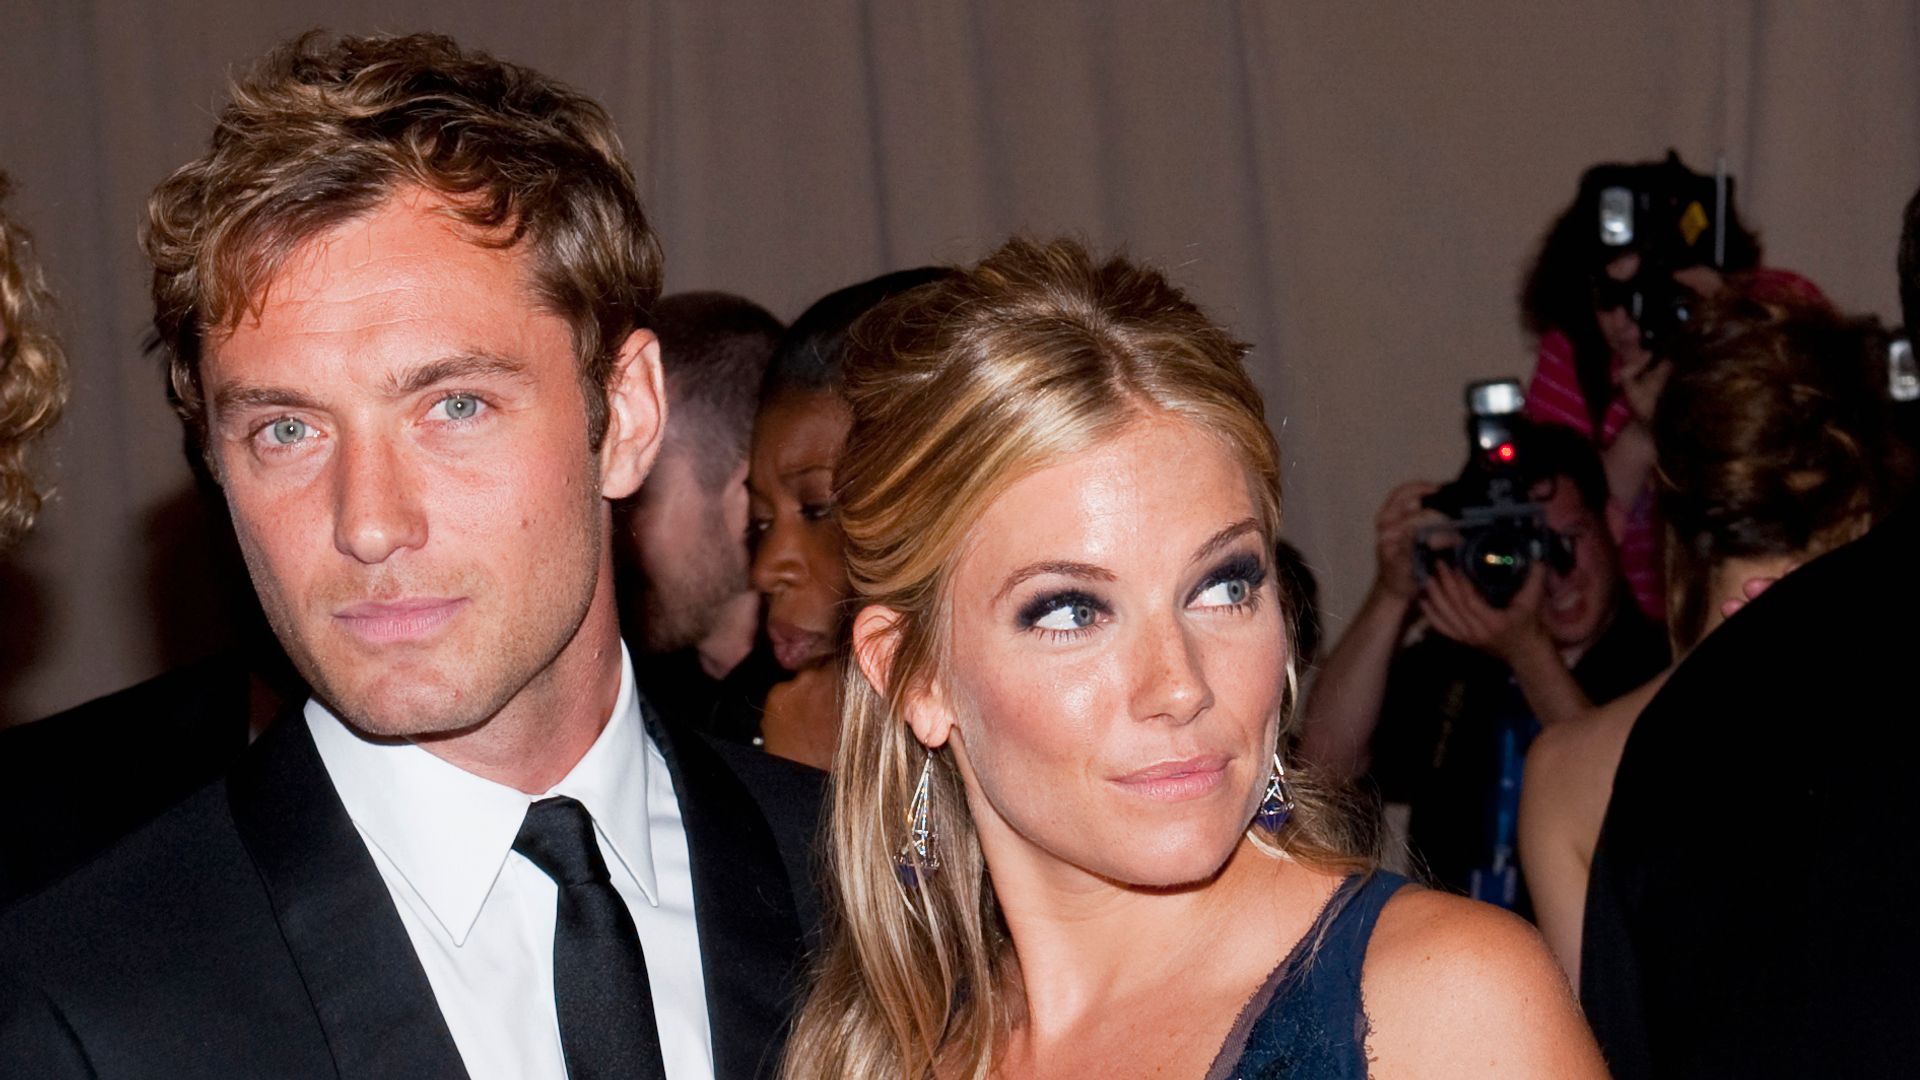 Jude Law and Sienna Miller at The Metropolitan Museum of Art in New York City in 2010